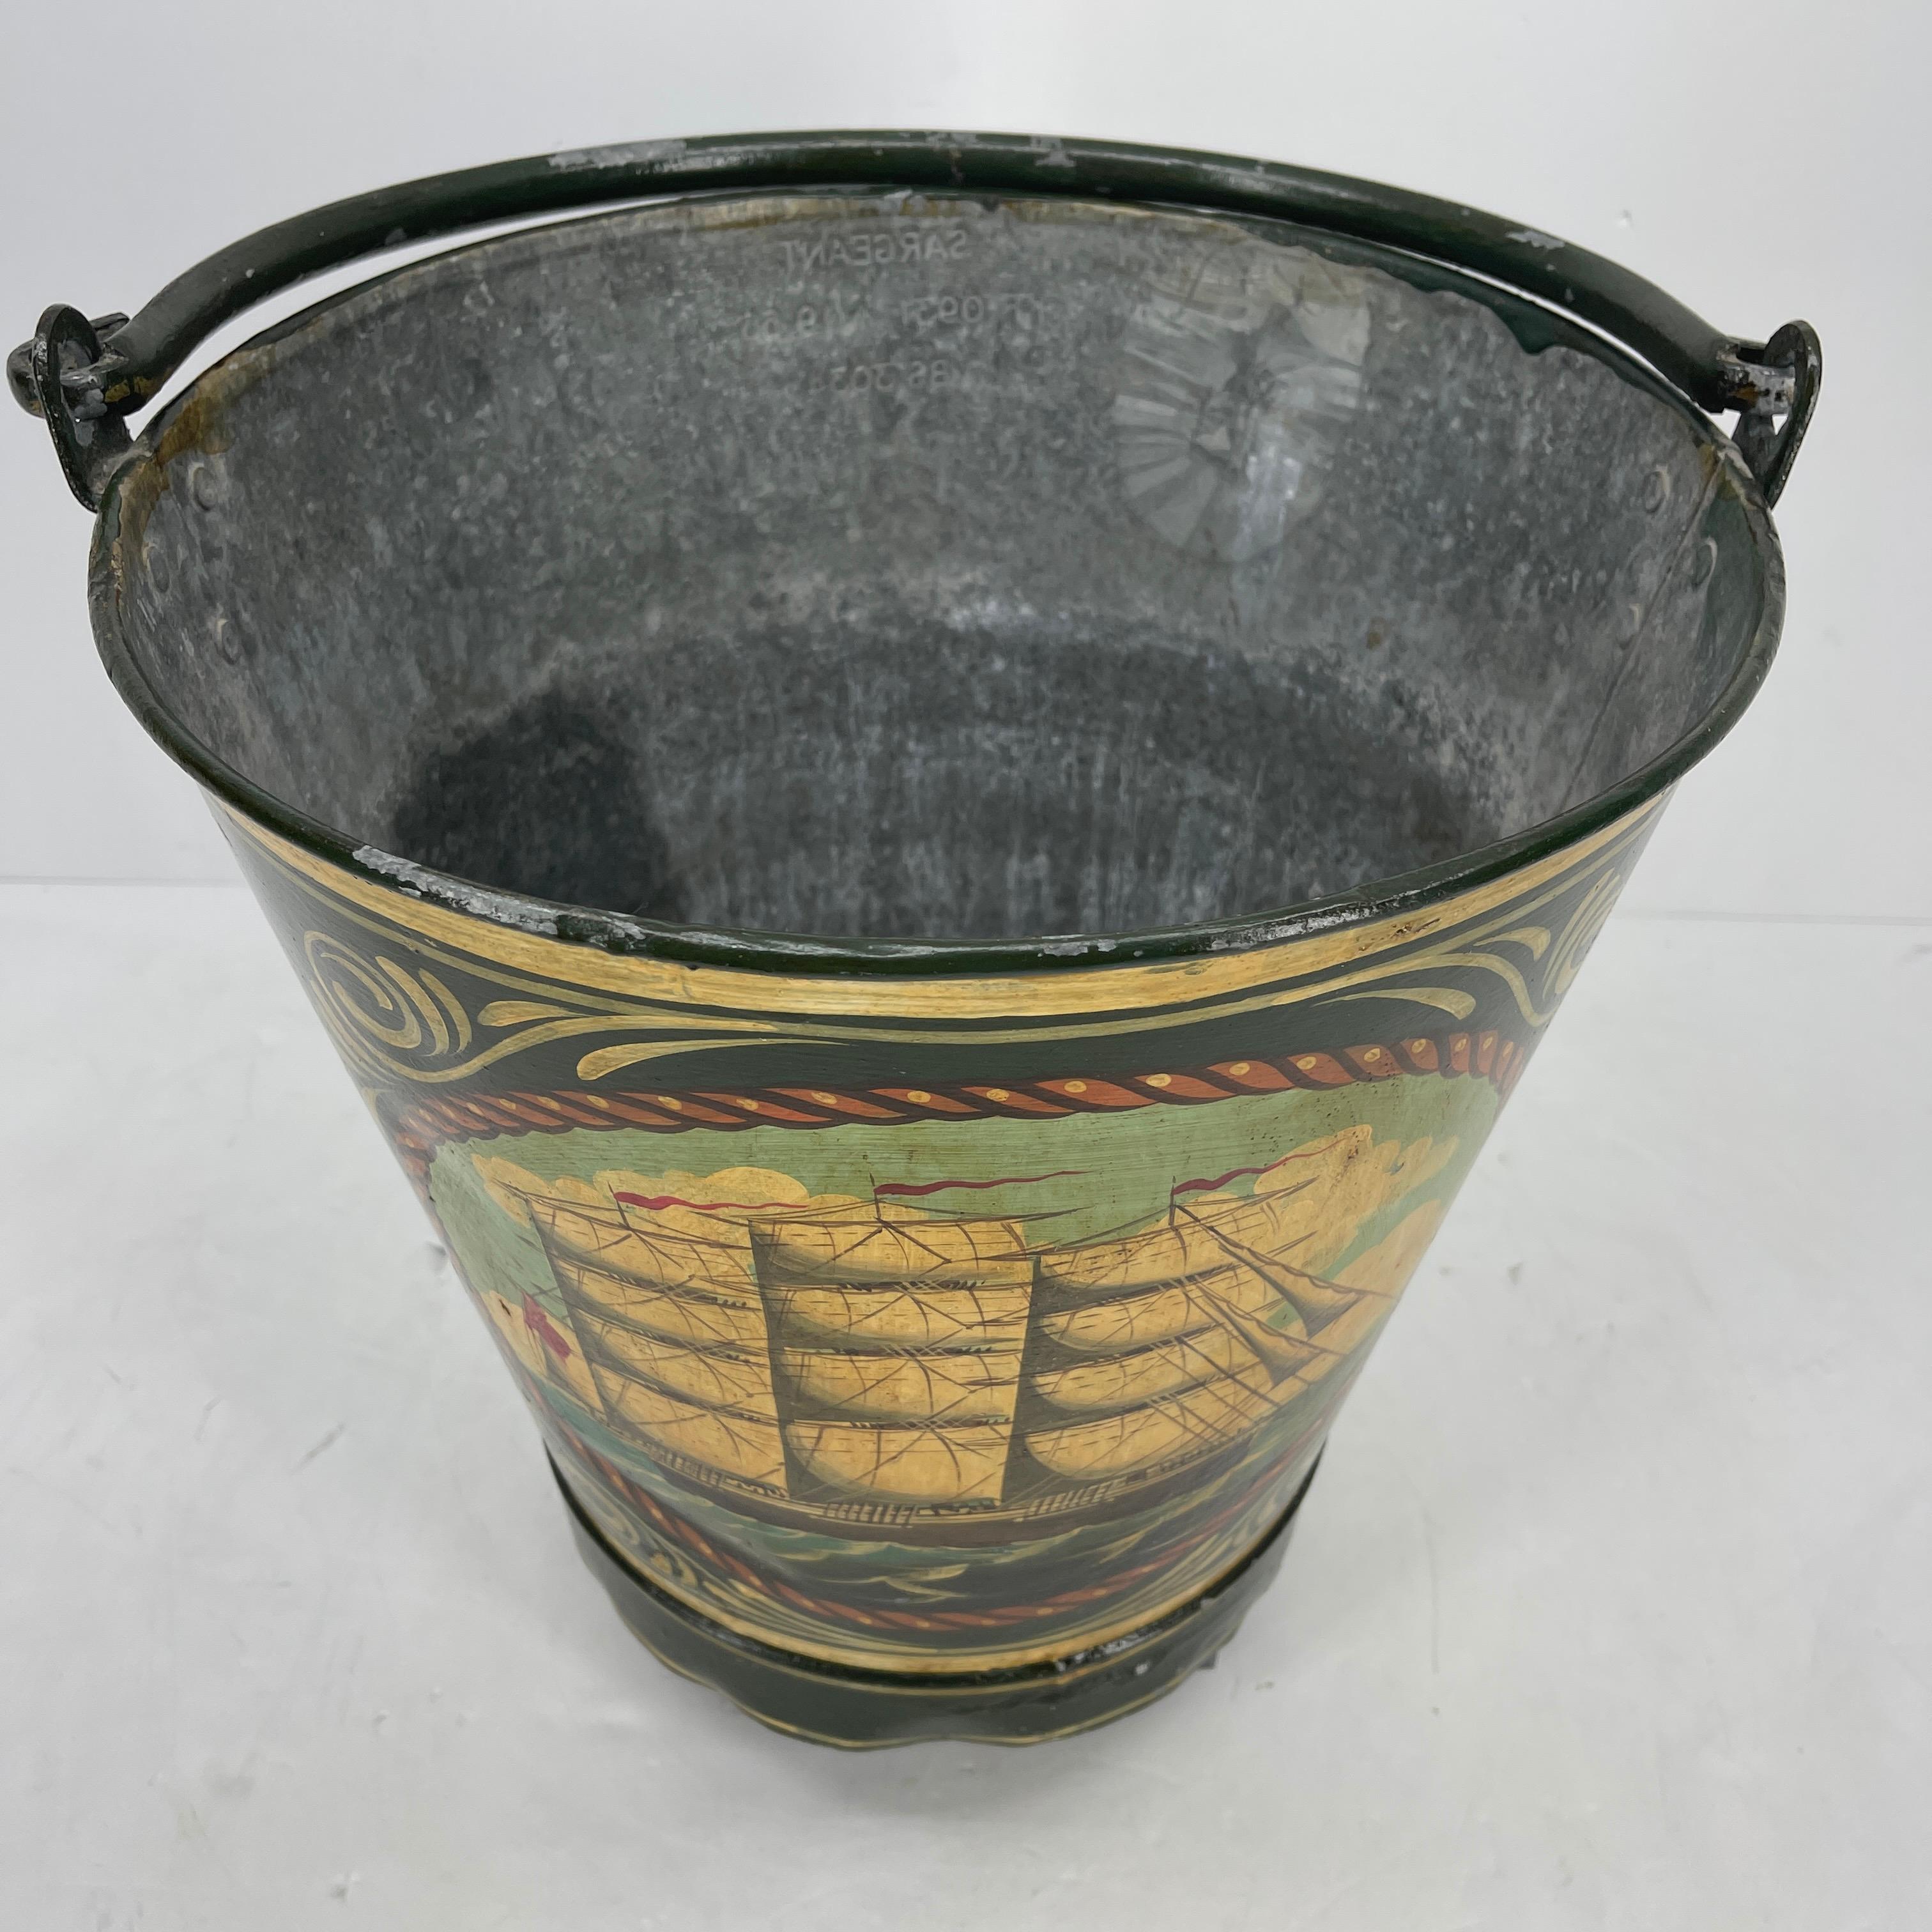 Antique painted metal fireplace log holder bucket. The bucket has a lovely nautical theme; the painted sailboat and rich colors make this functional fireplace accessory a welcome addition to the maritime collectors everywhere.